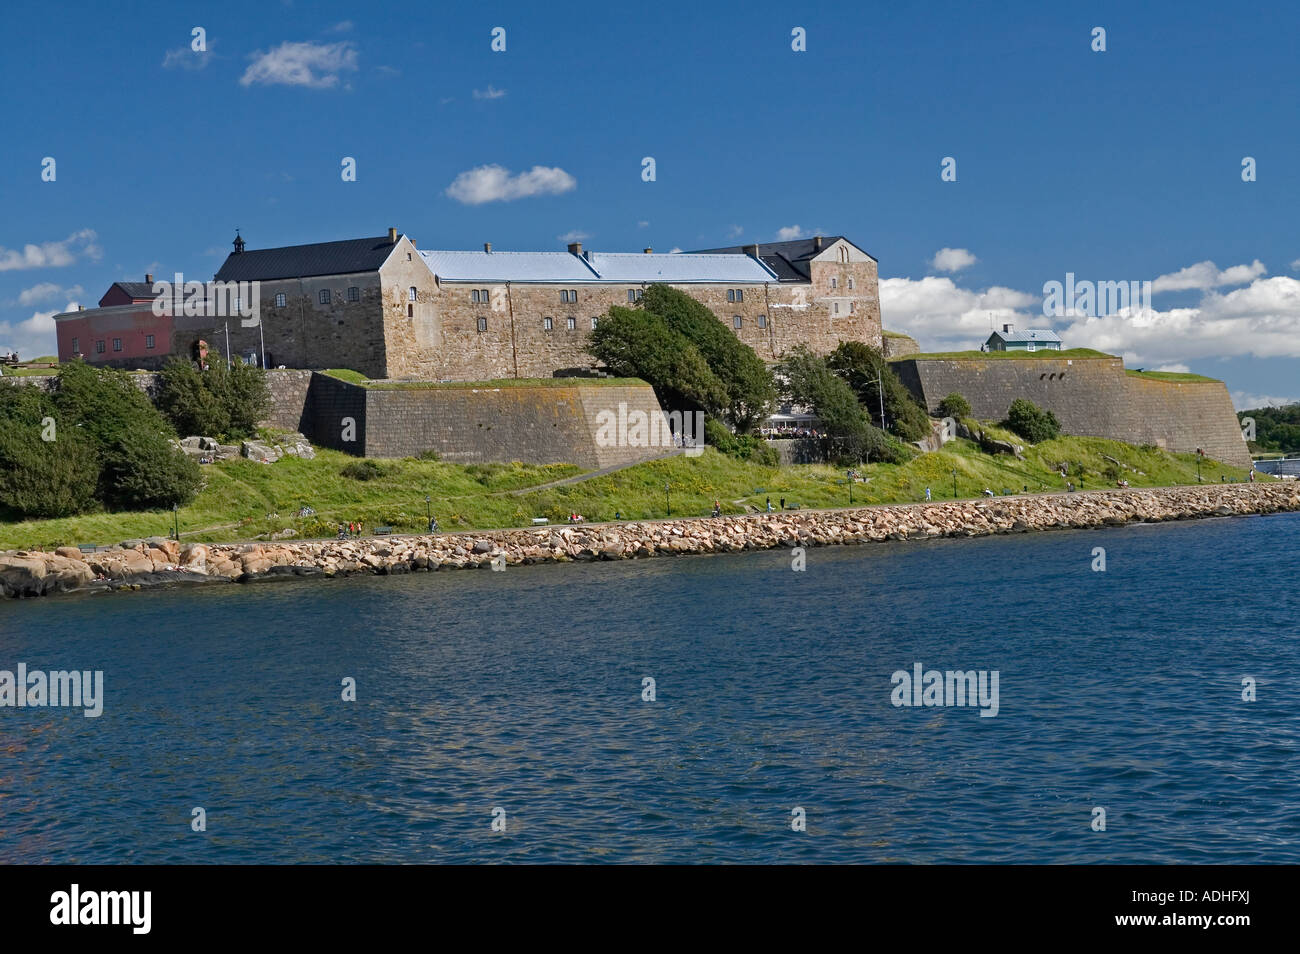 Varberg Fortress Varberg Southern Sweden The fortress was built 1290